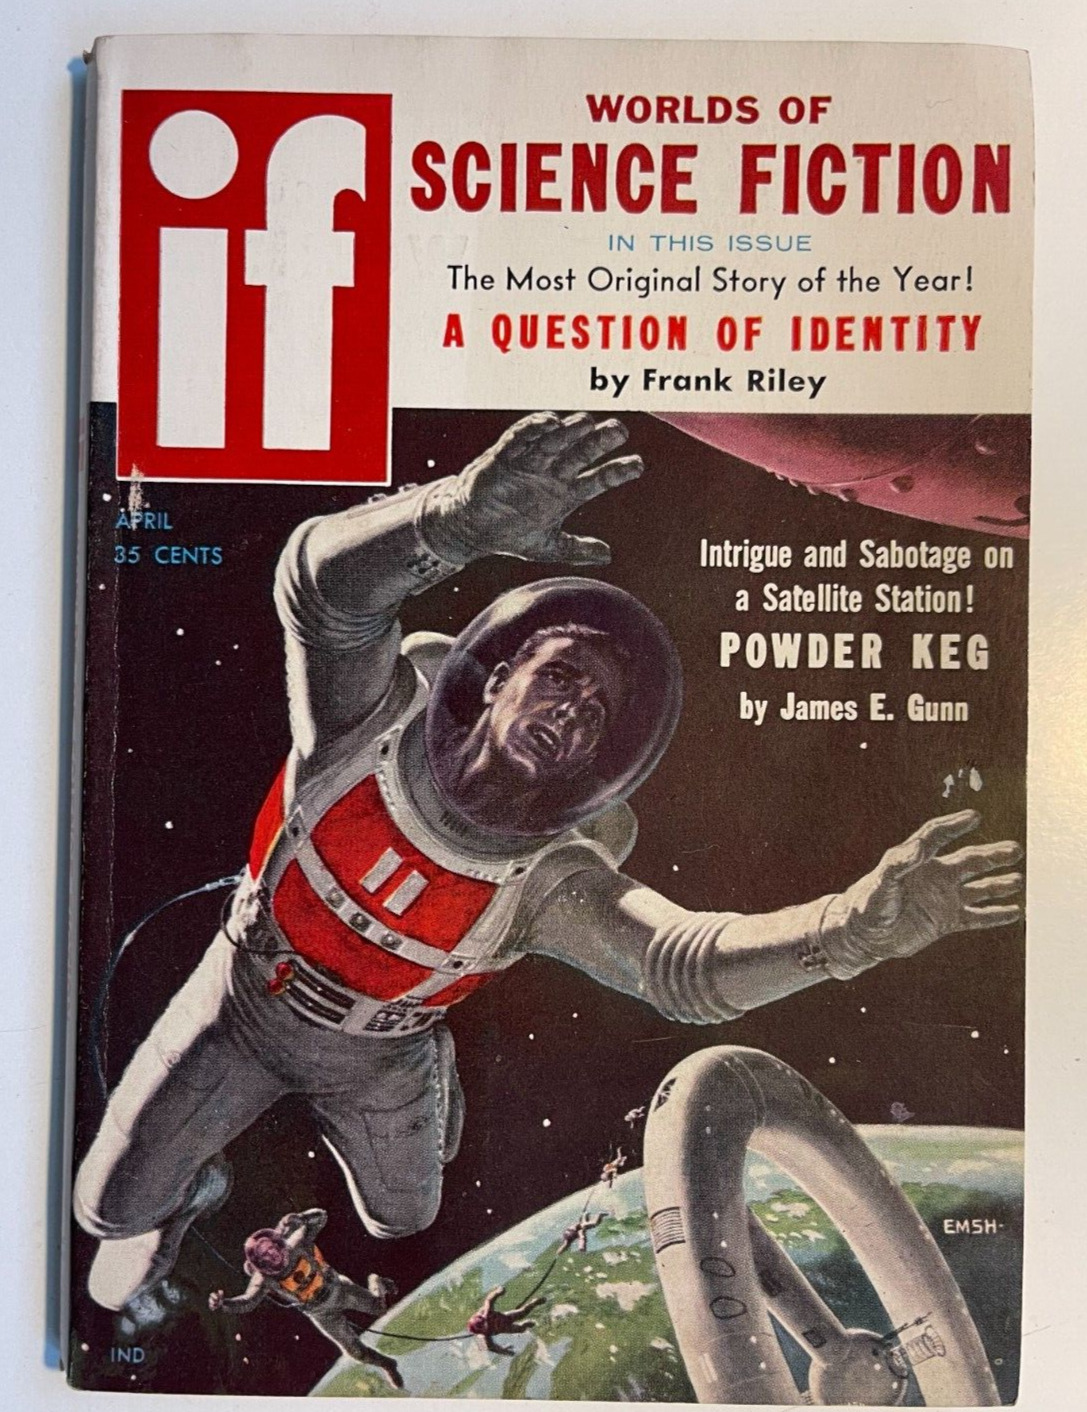 IF Worlds of SCIENCE FICTION digest Vol 8, no. 3 APRIL 1958  Cover ED EMSH